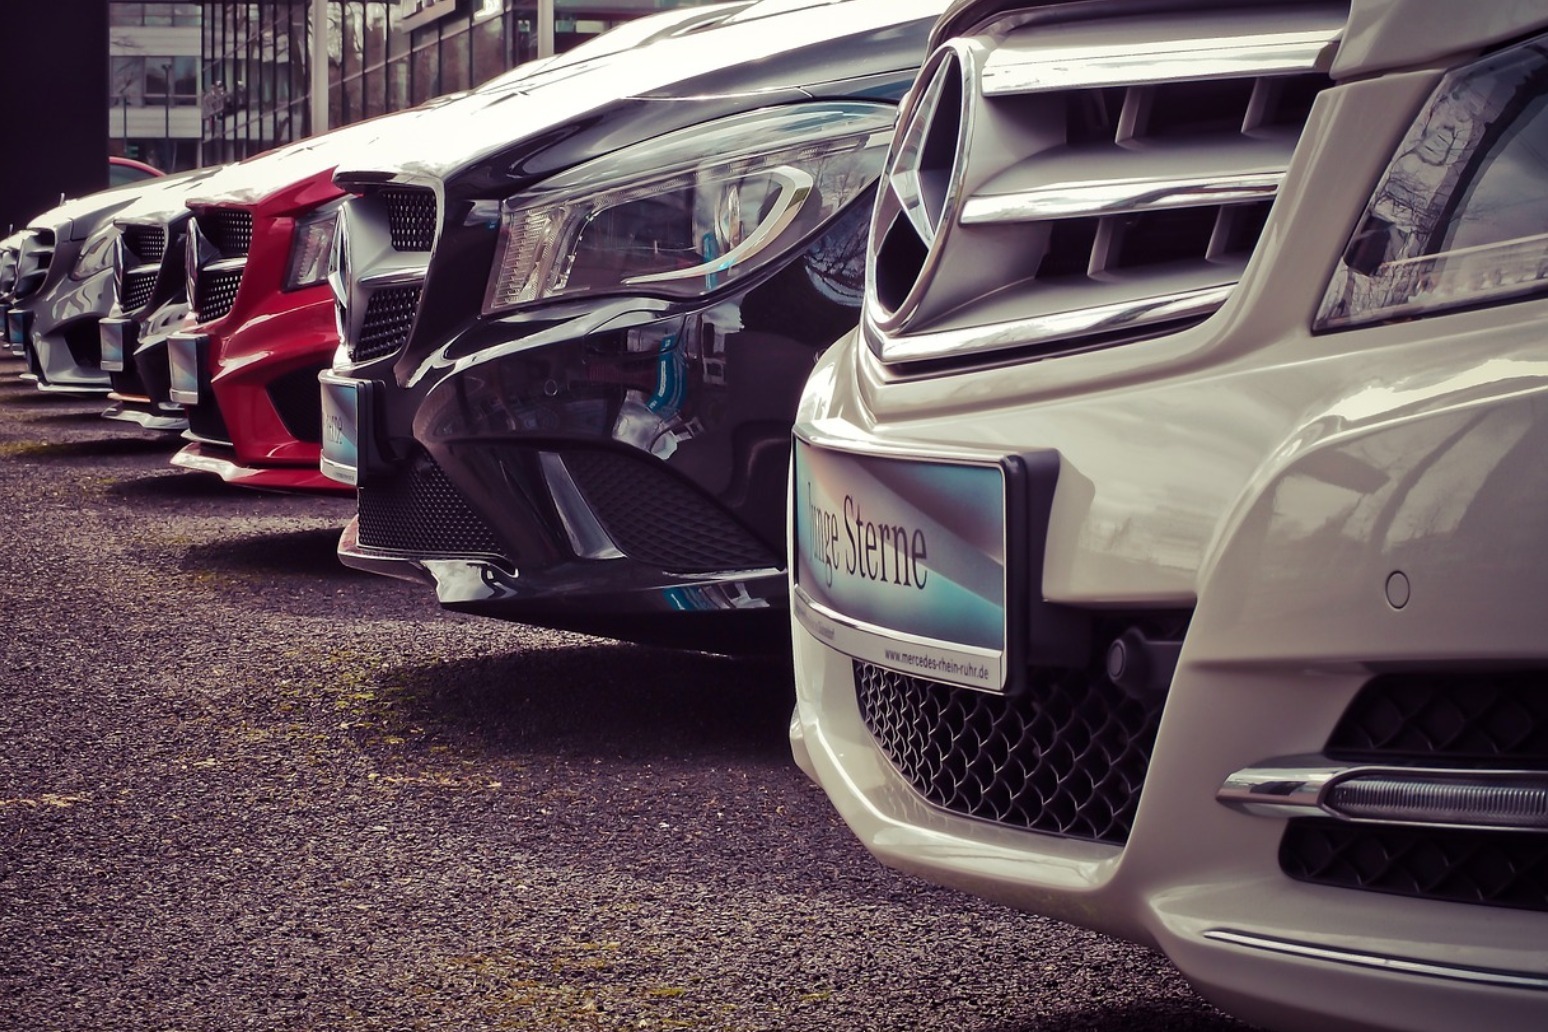 New car sales drop to their lowest levels since 2009 